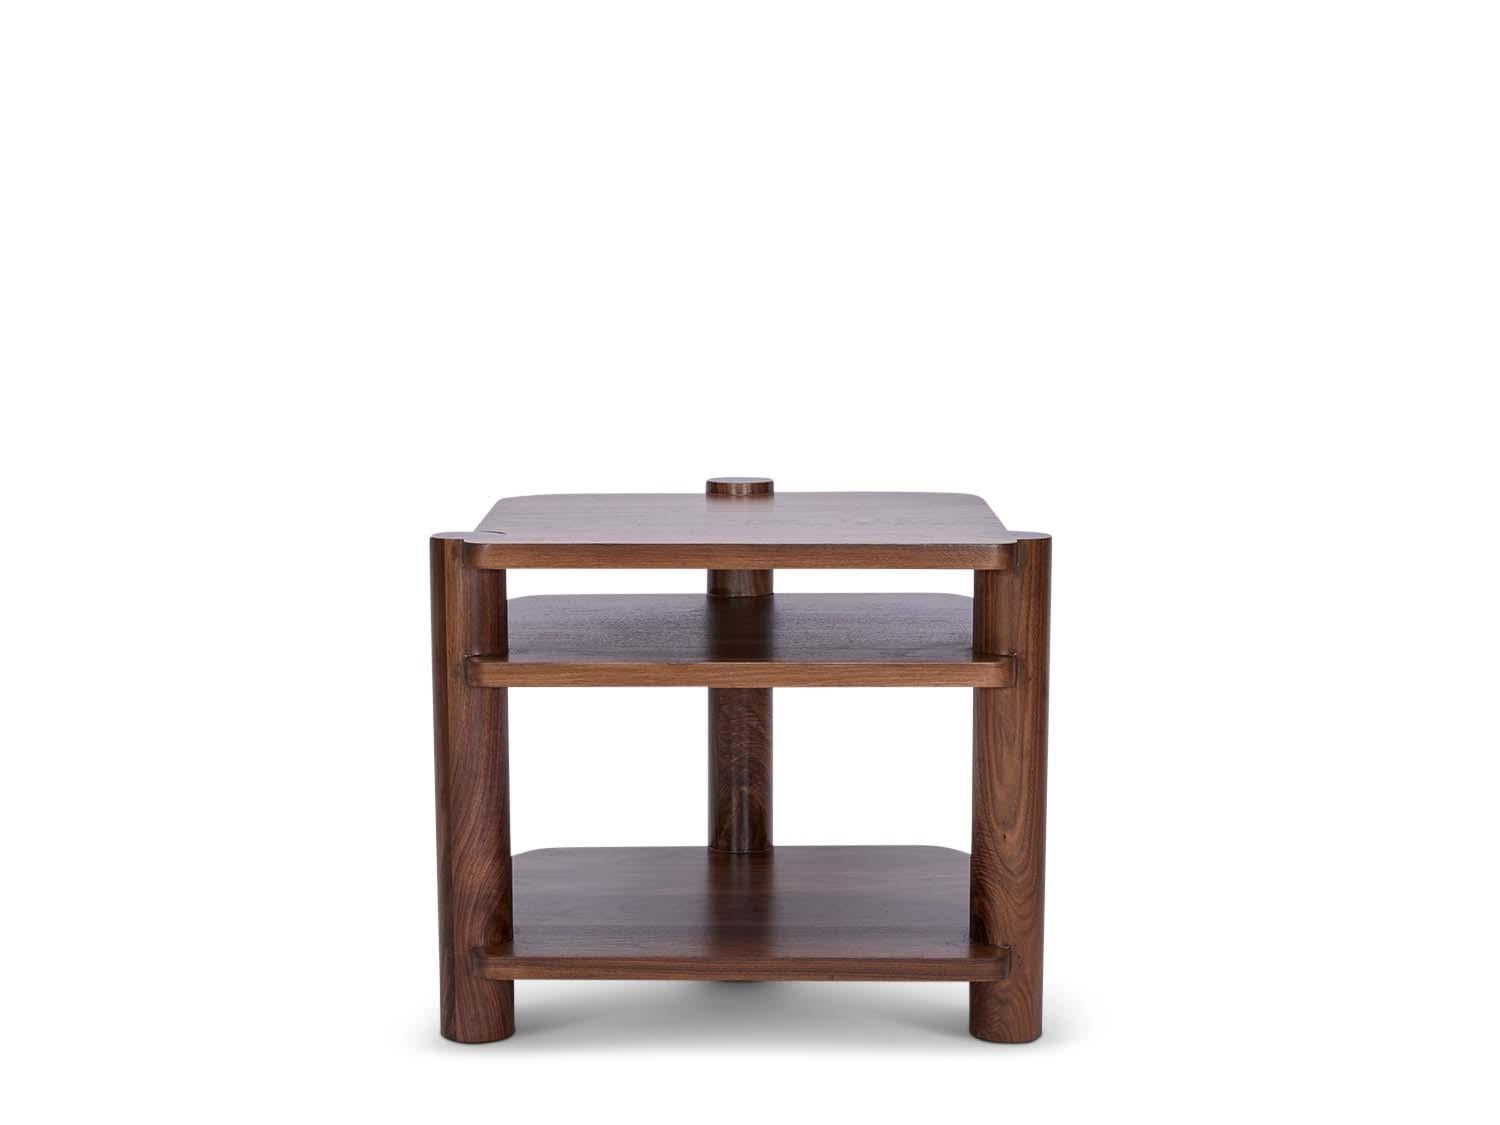 The Jalama End Table pairs sturdy hardwood dowels with cascading selves that play with various soft corners. 